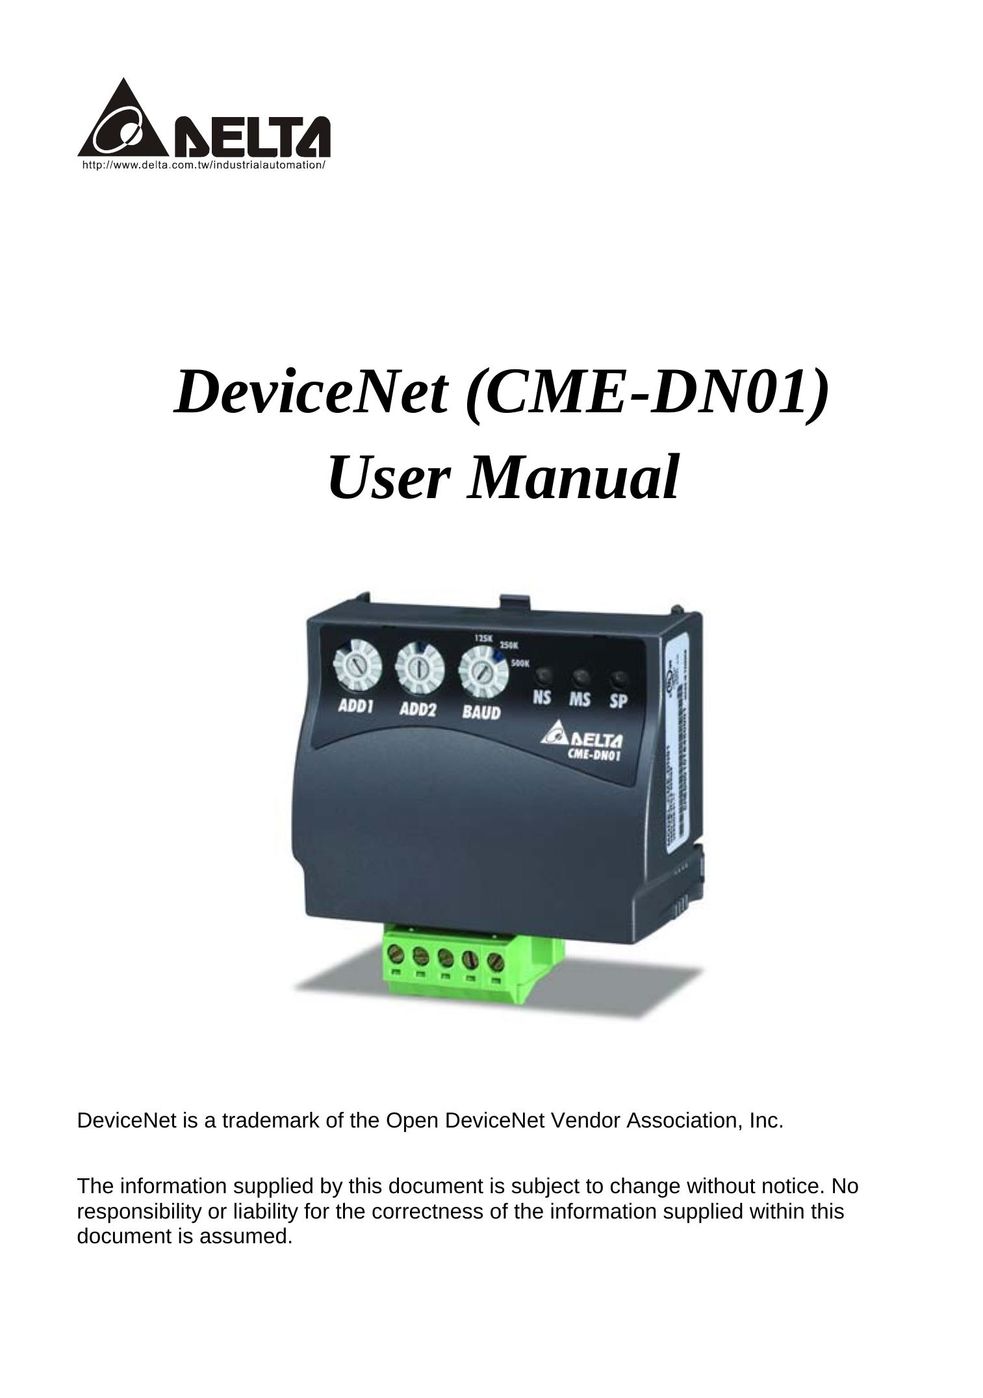 Delta Electronics CME-DN01 Network Card User Manual